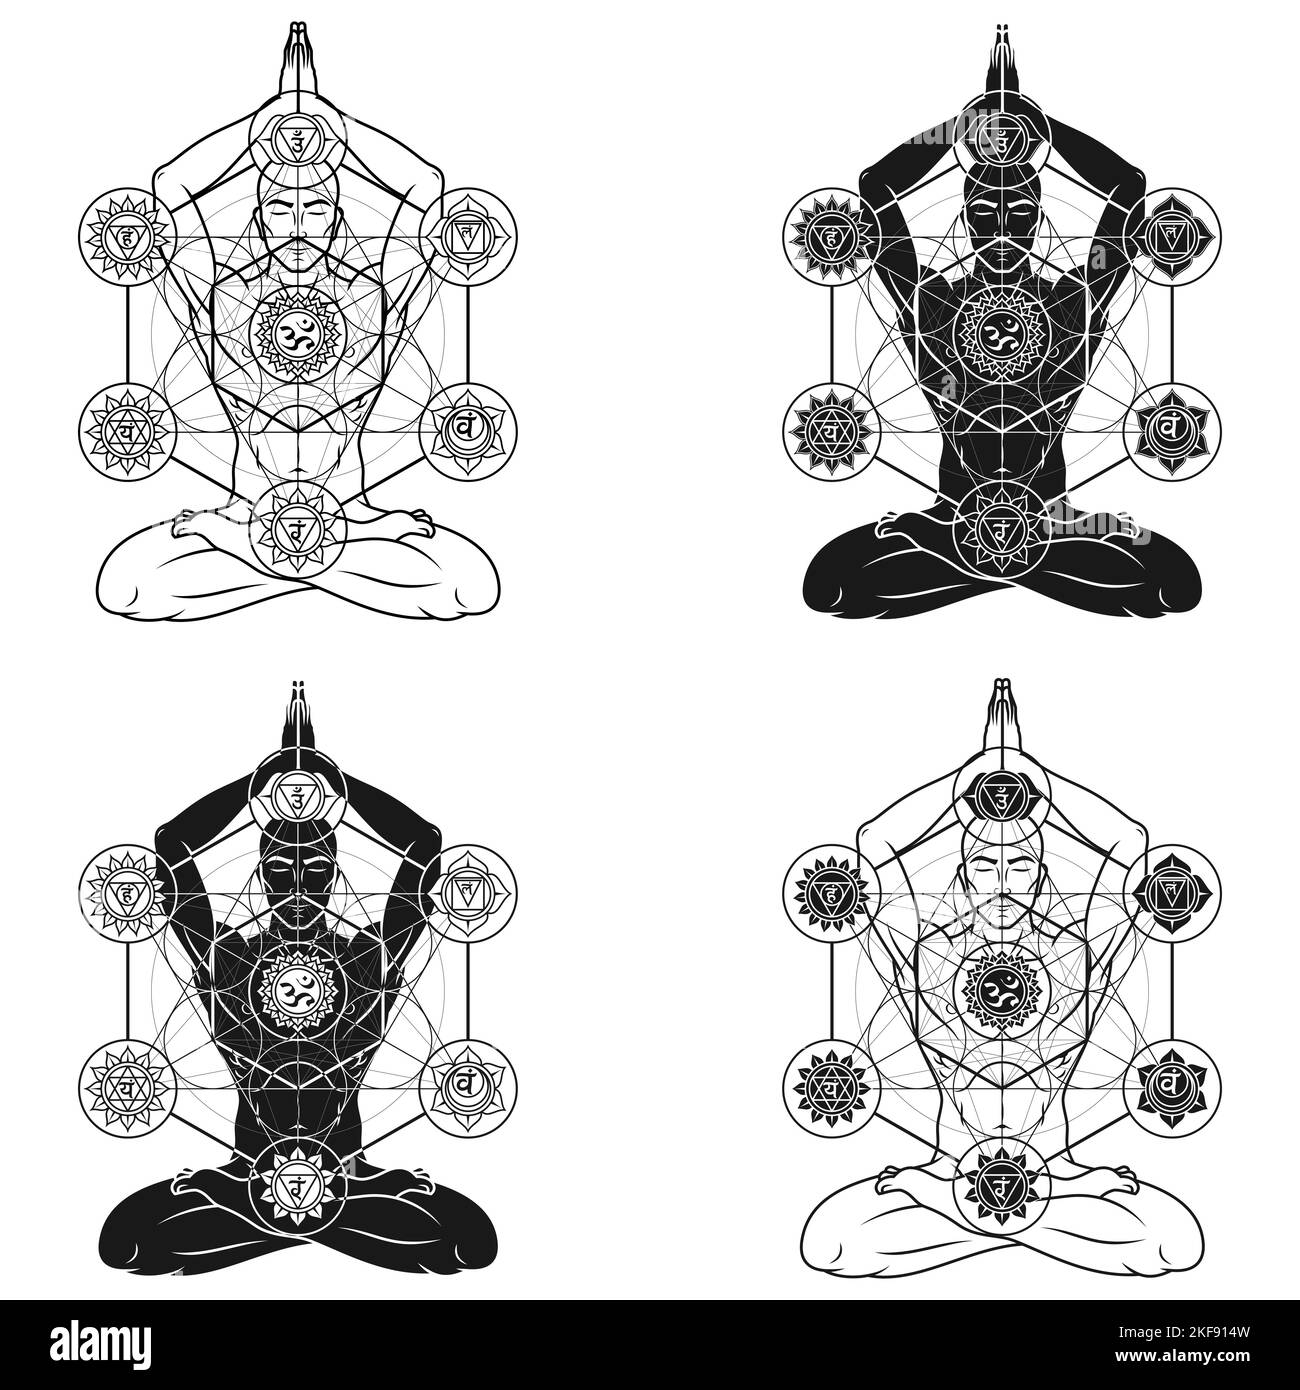 Vector design of man meditating in lotus flower position with metatron figure and chakra symbol Stock Vector